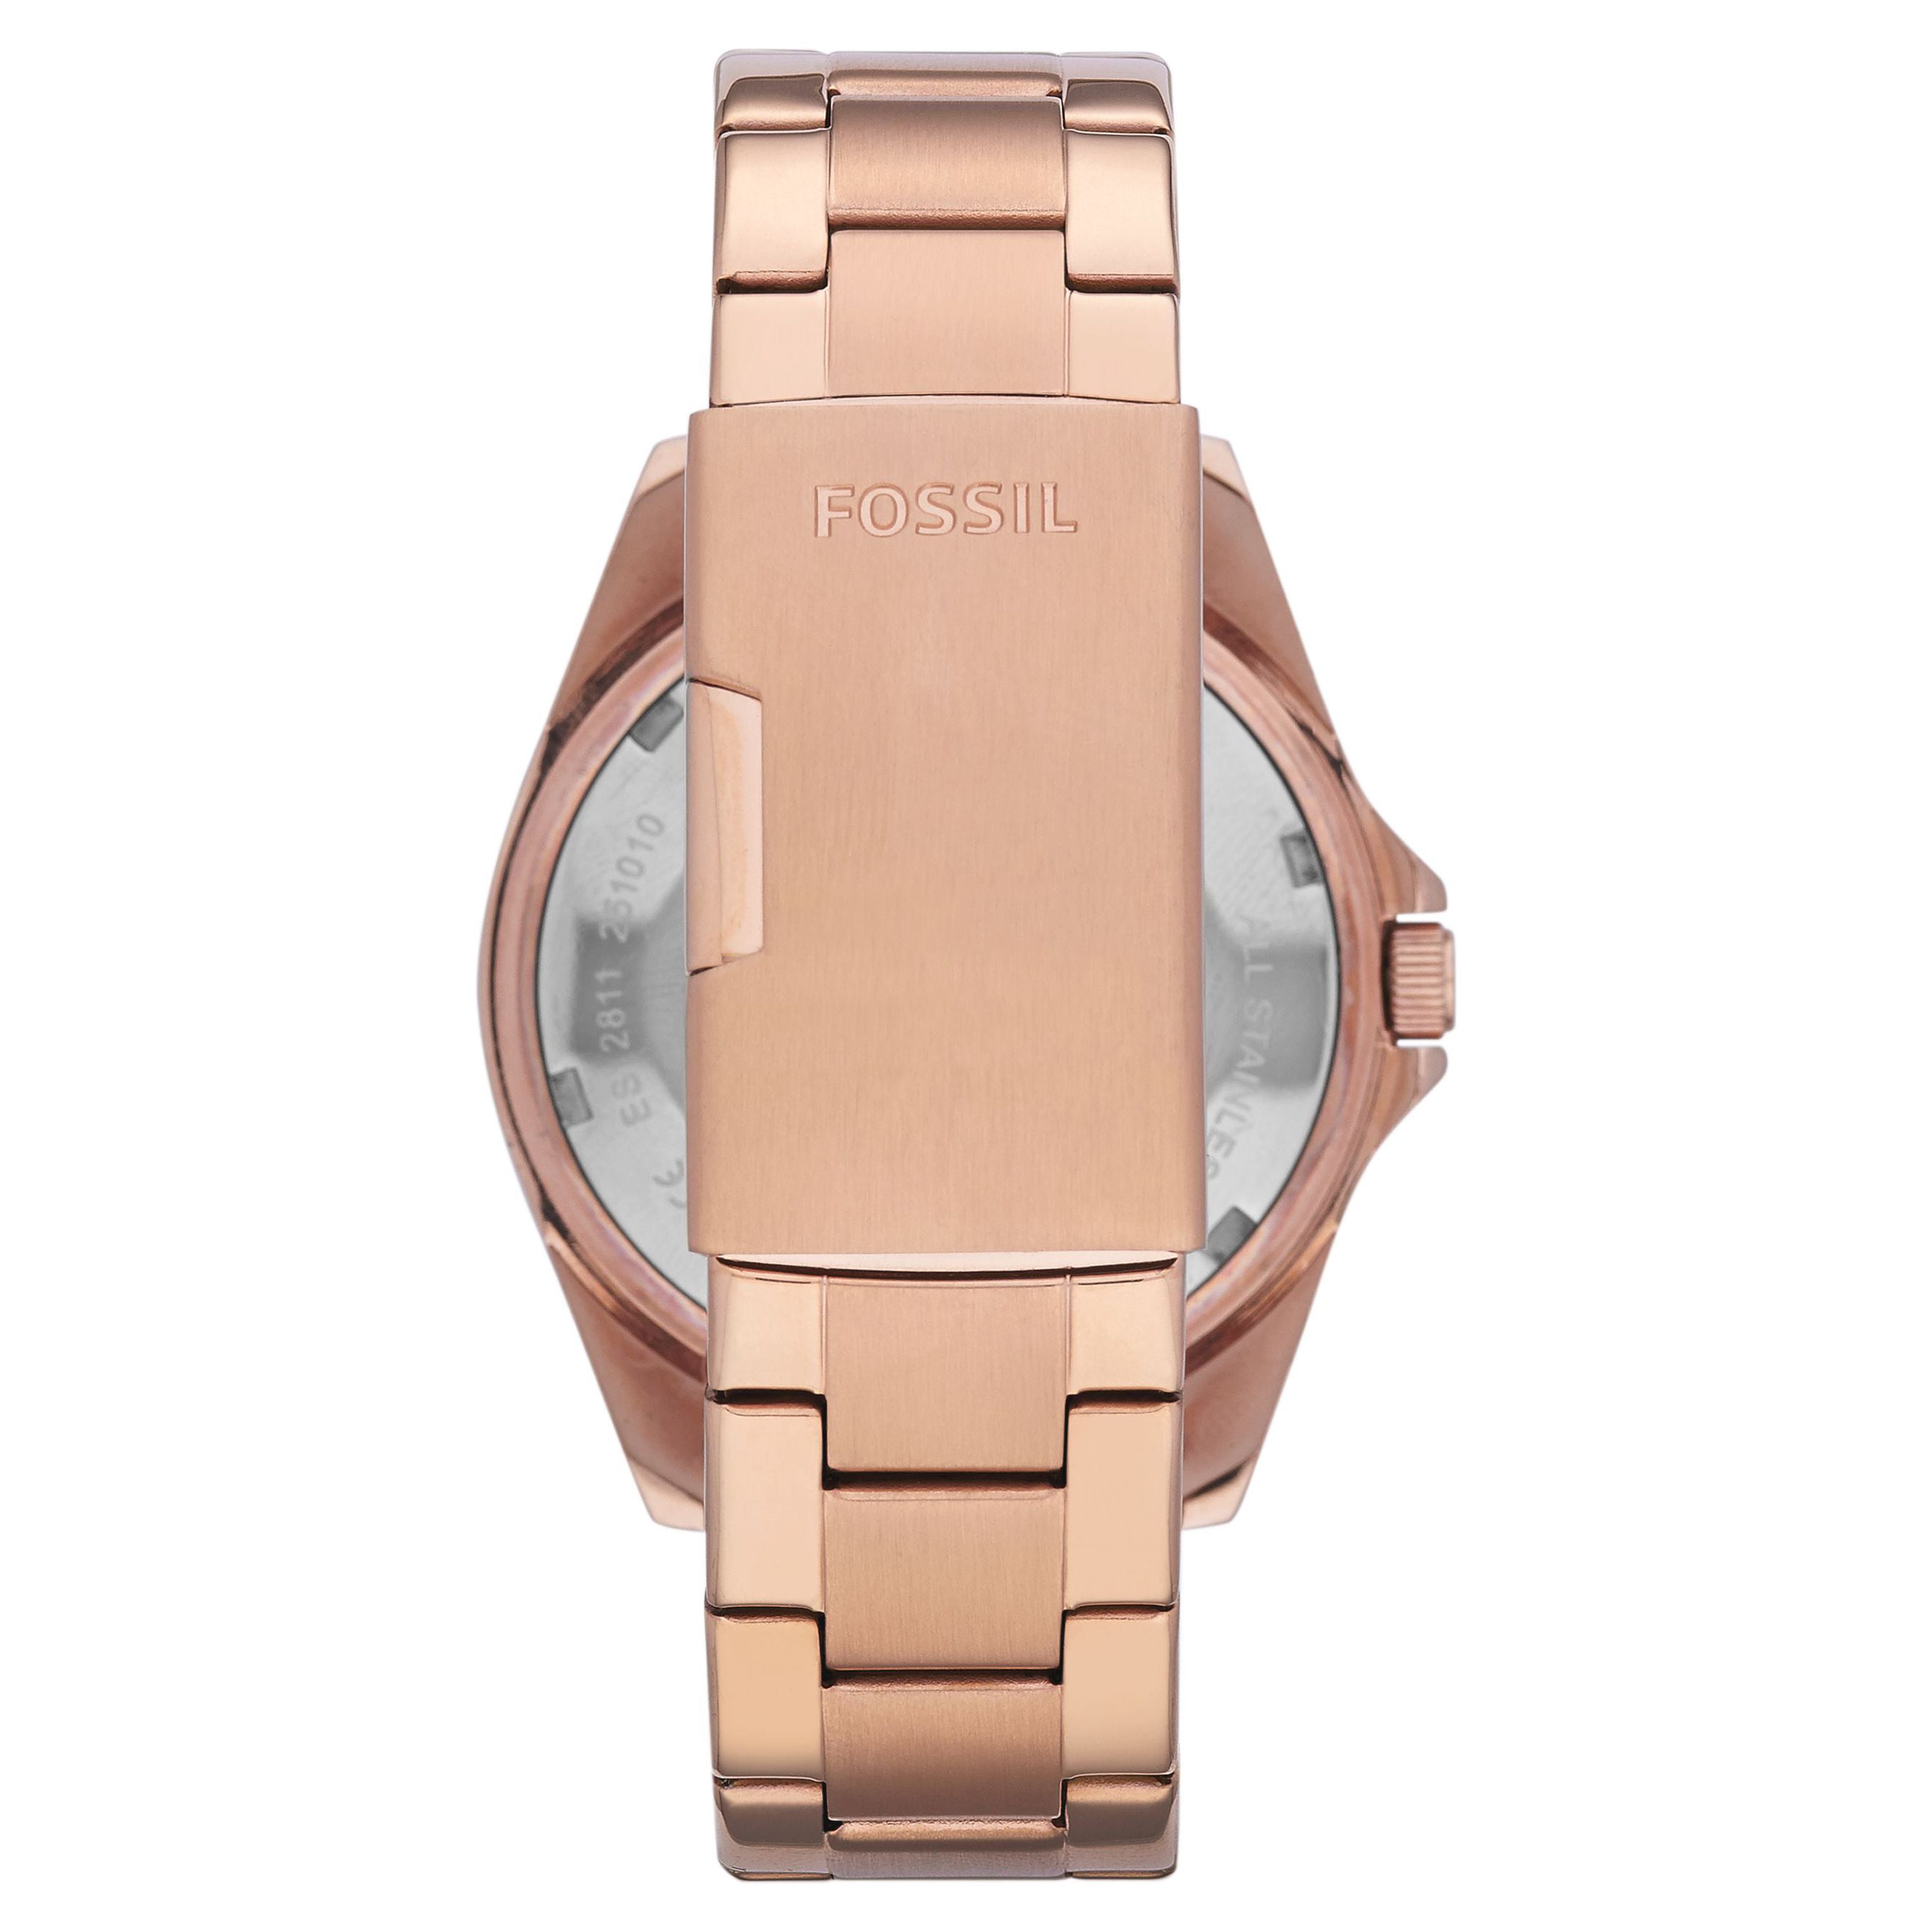 Fossil Women's Riley Multifunction, Rose Gold-Tone Stainless Steel Watch, ES2811 - image 3 of 4